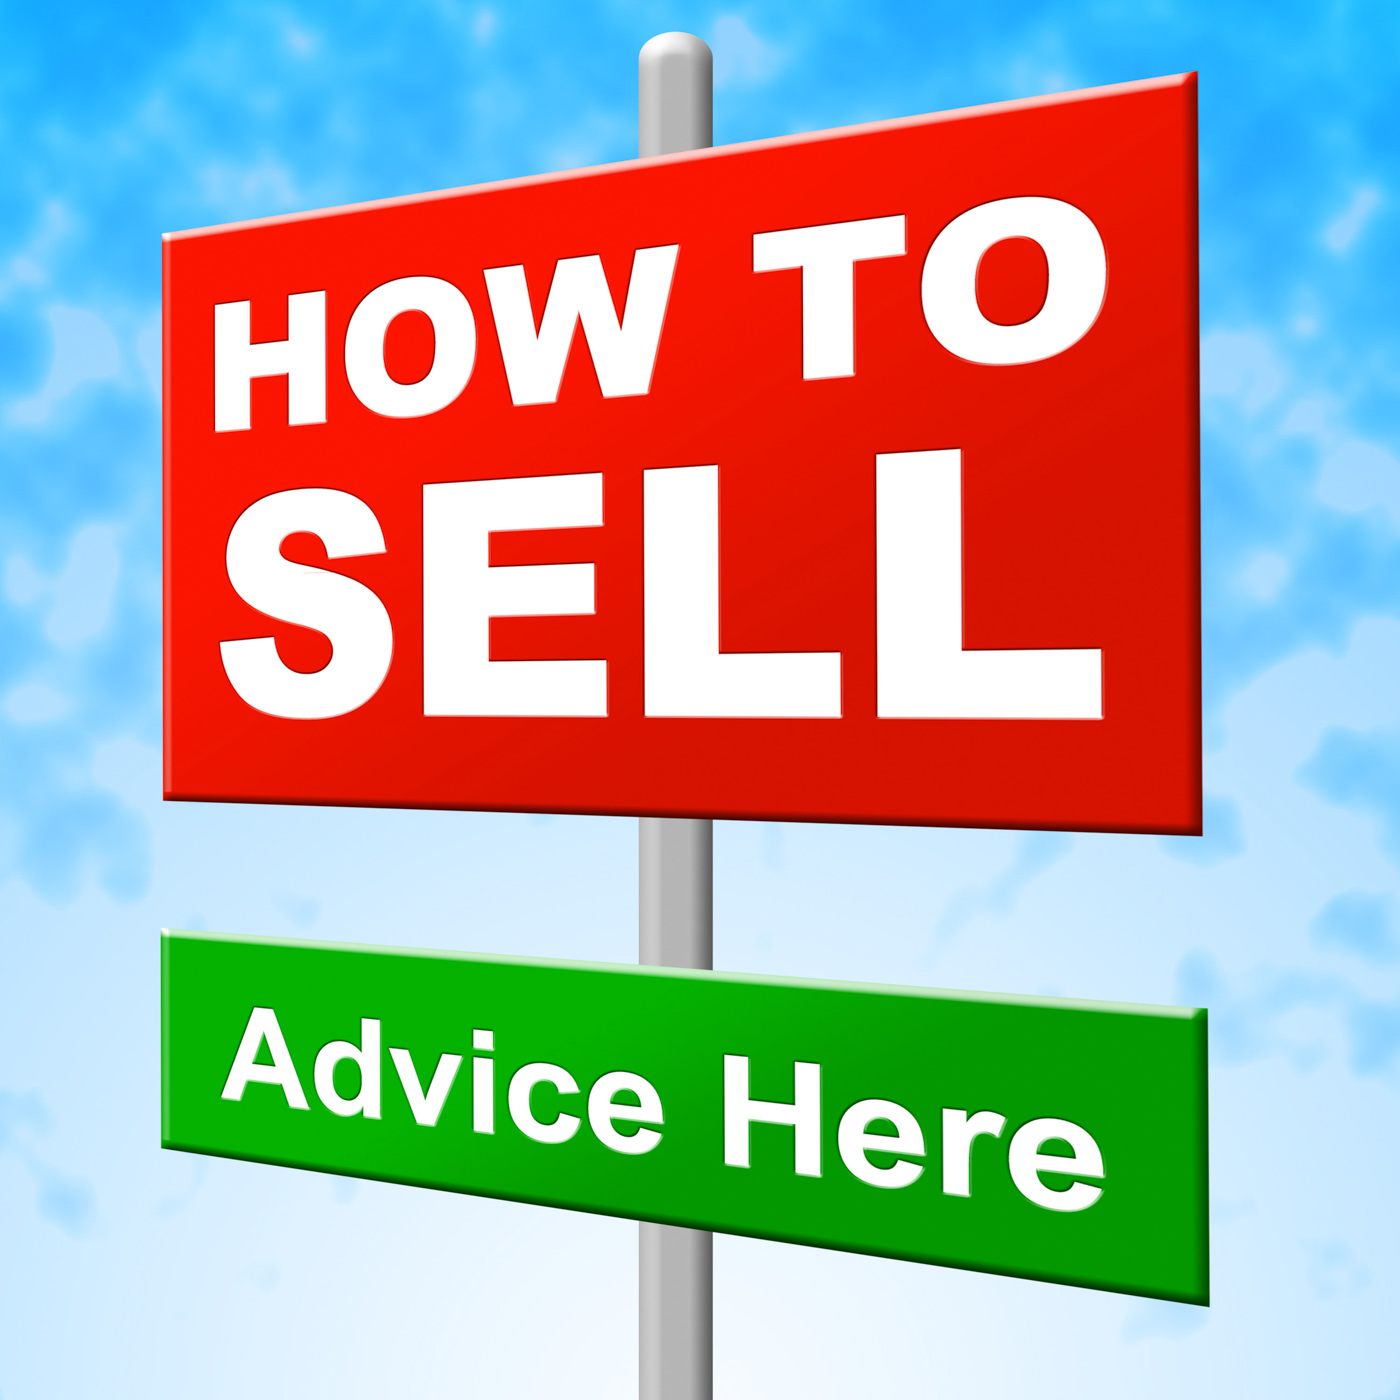 How to sell shows house for sale and message photo